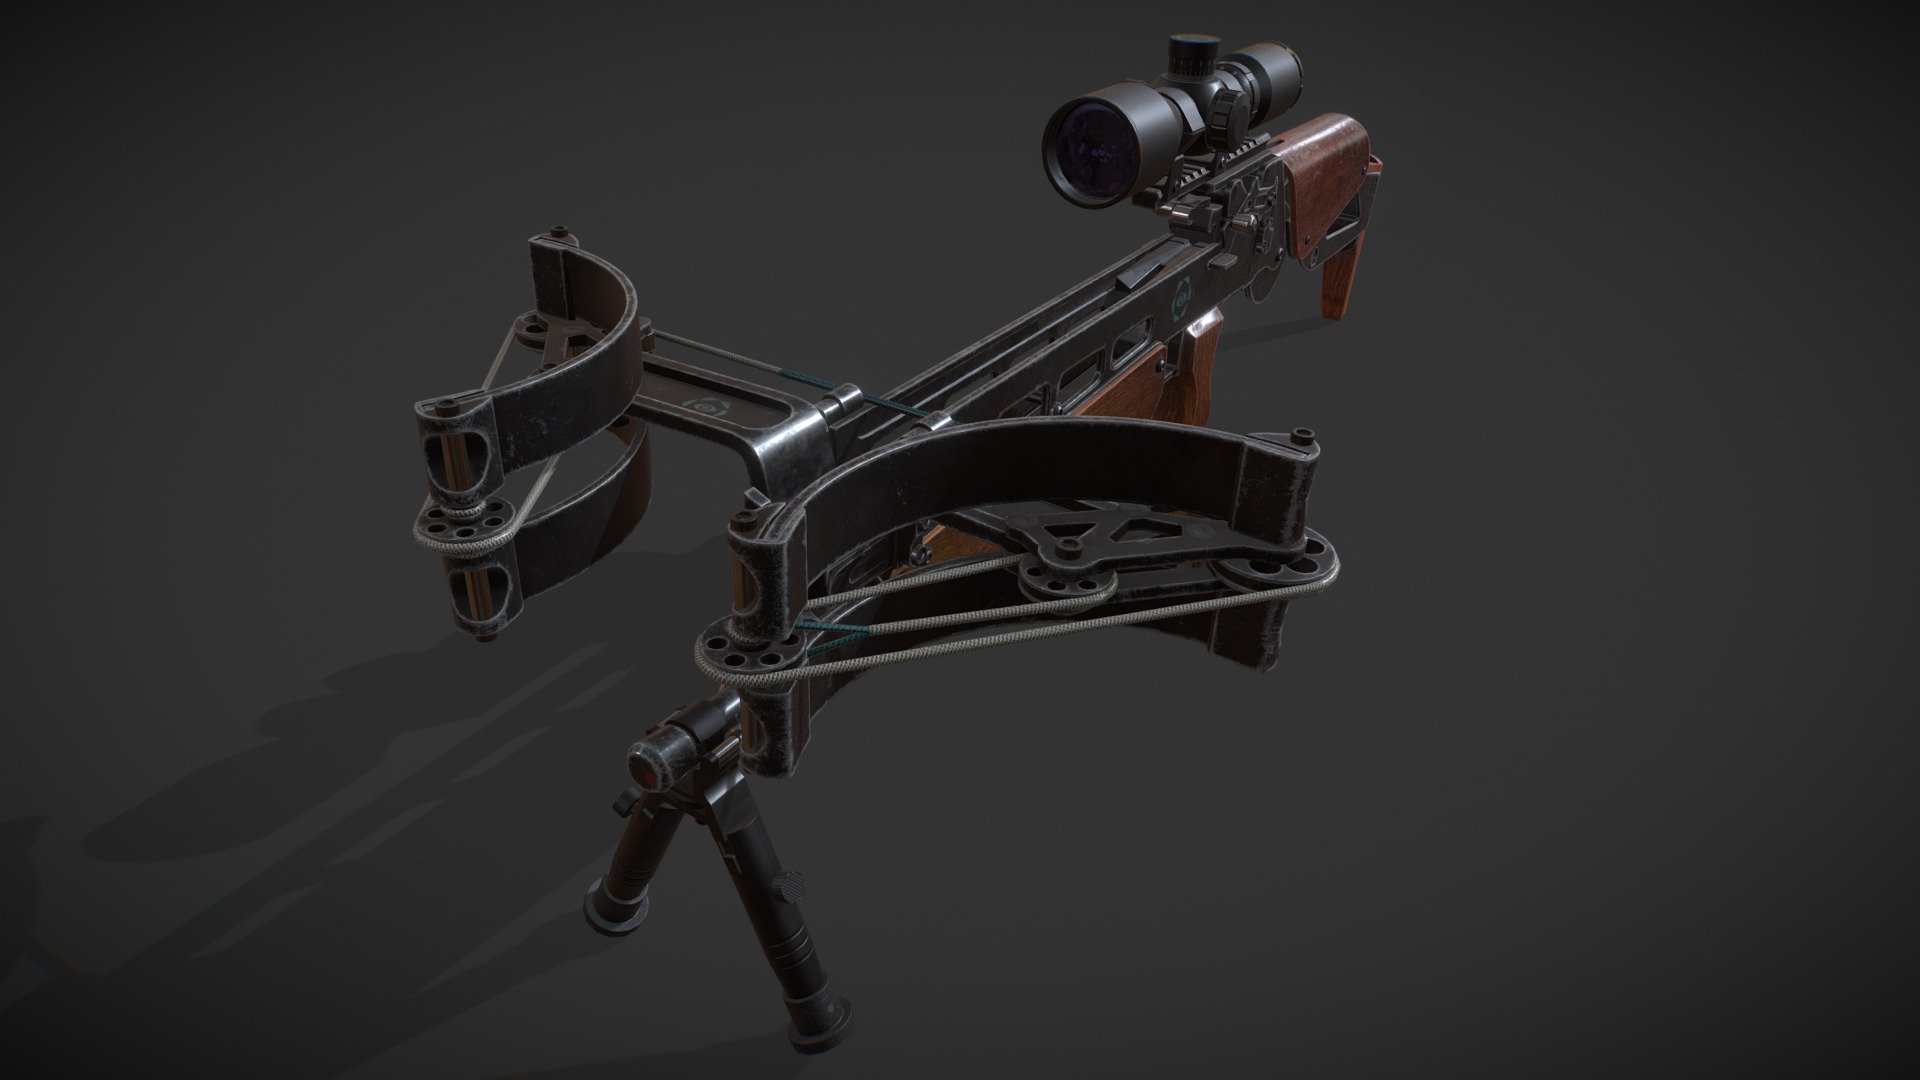 This is a tactical crossbow based on the so called Deanbow.
It´s modelled in 3ds Max and textured in Photoshop and Substance Painter 3d model